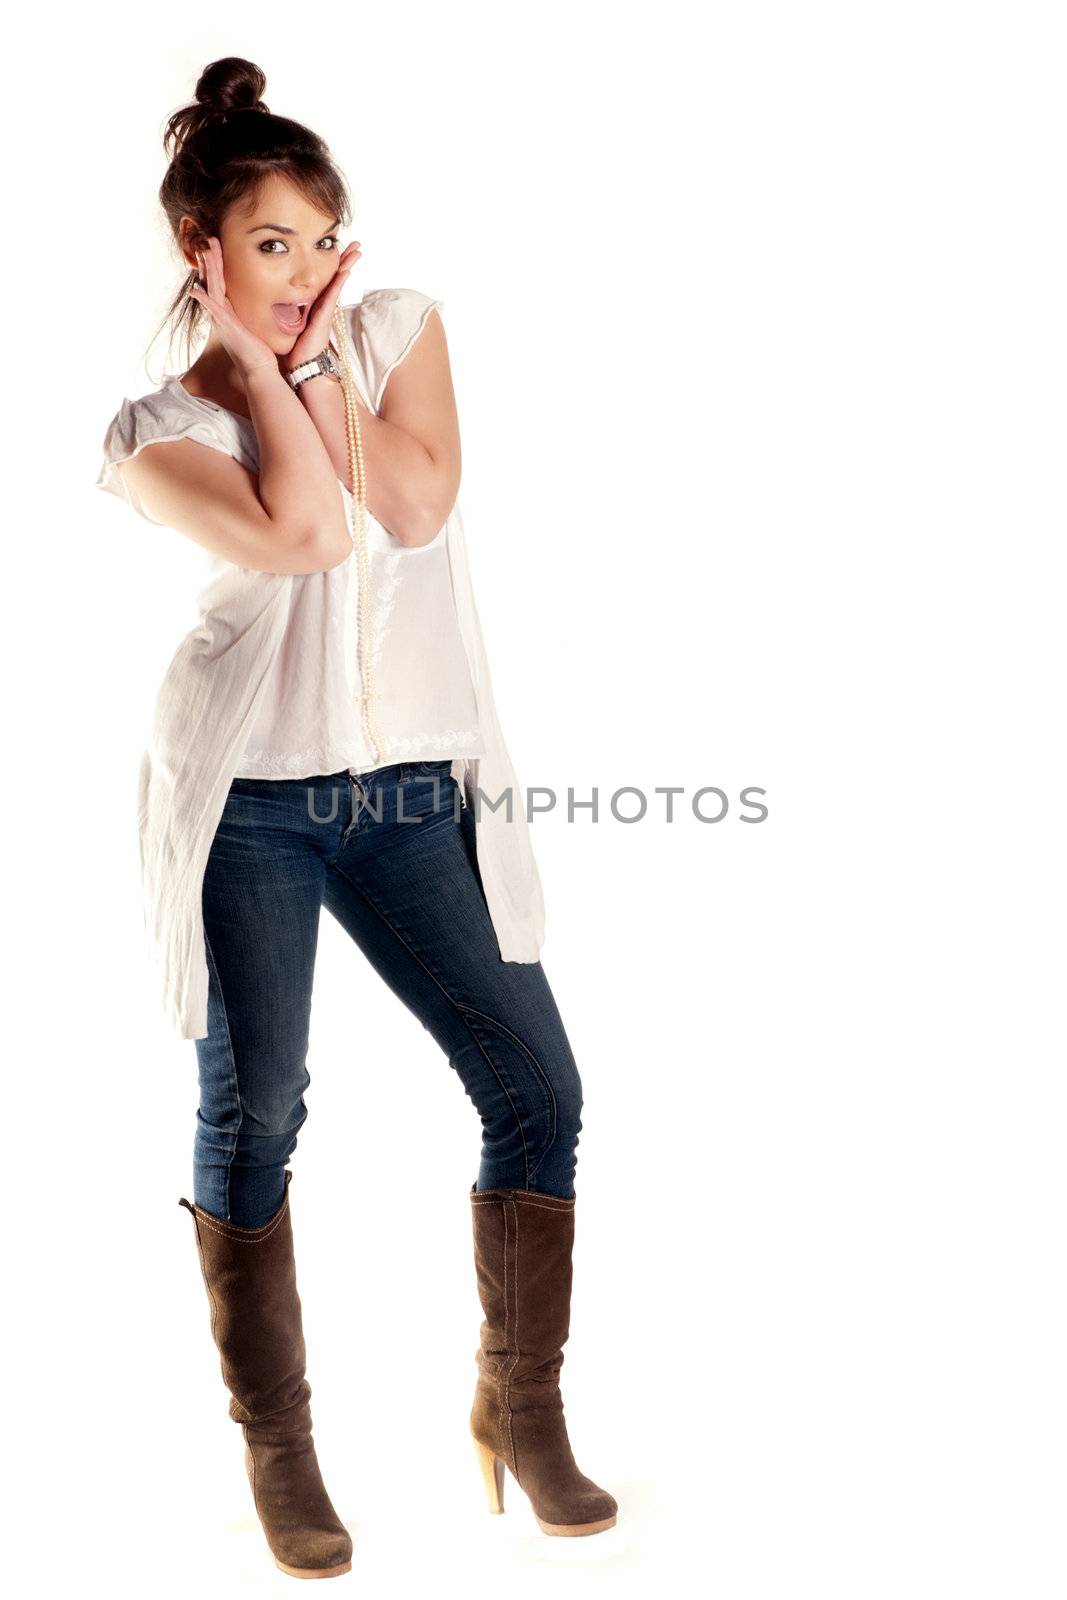 Beautiful young amazed expression in a studio isolaetd on white